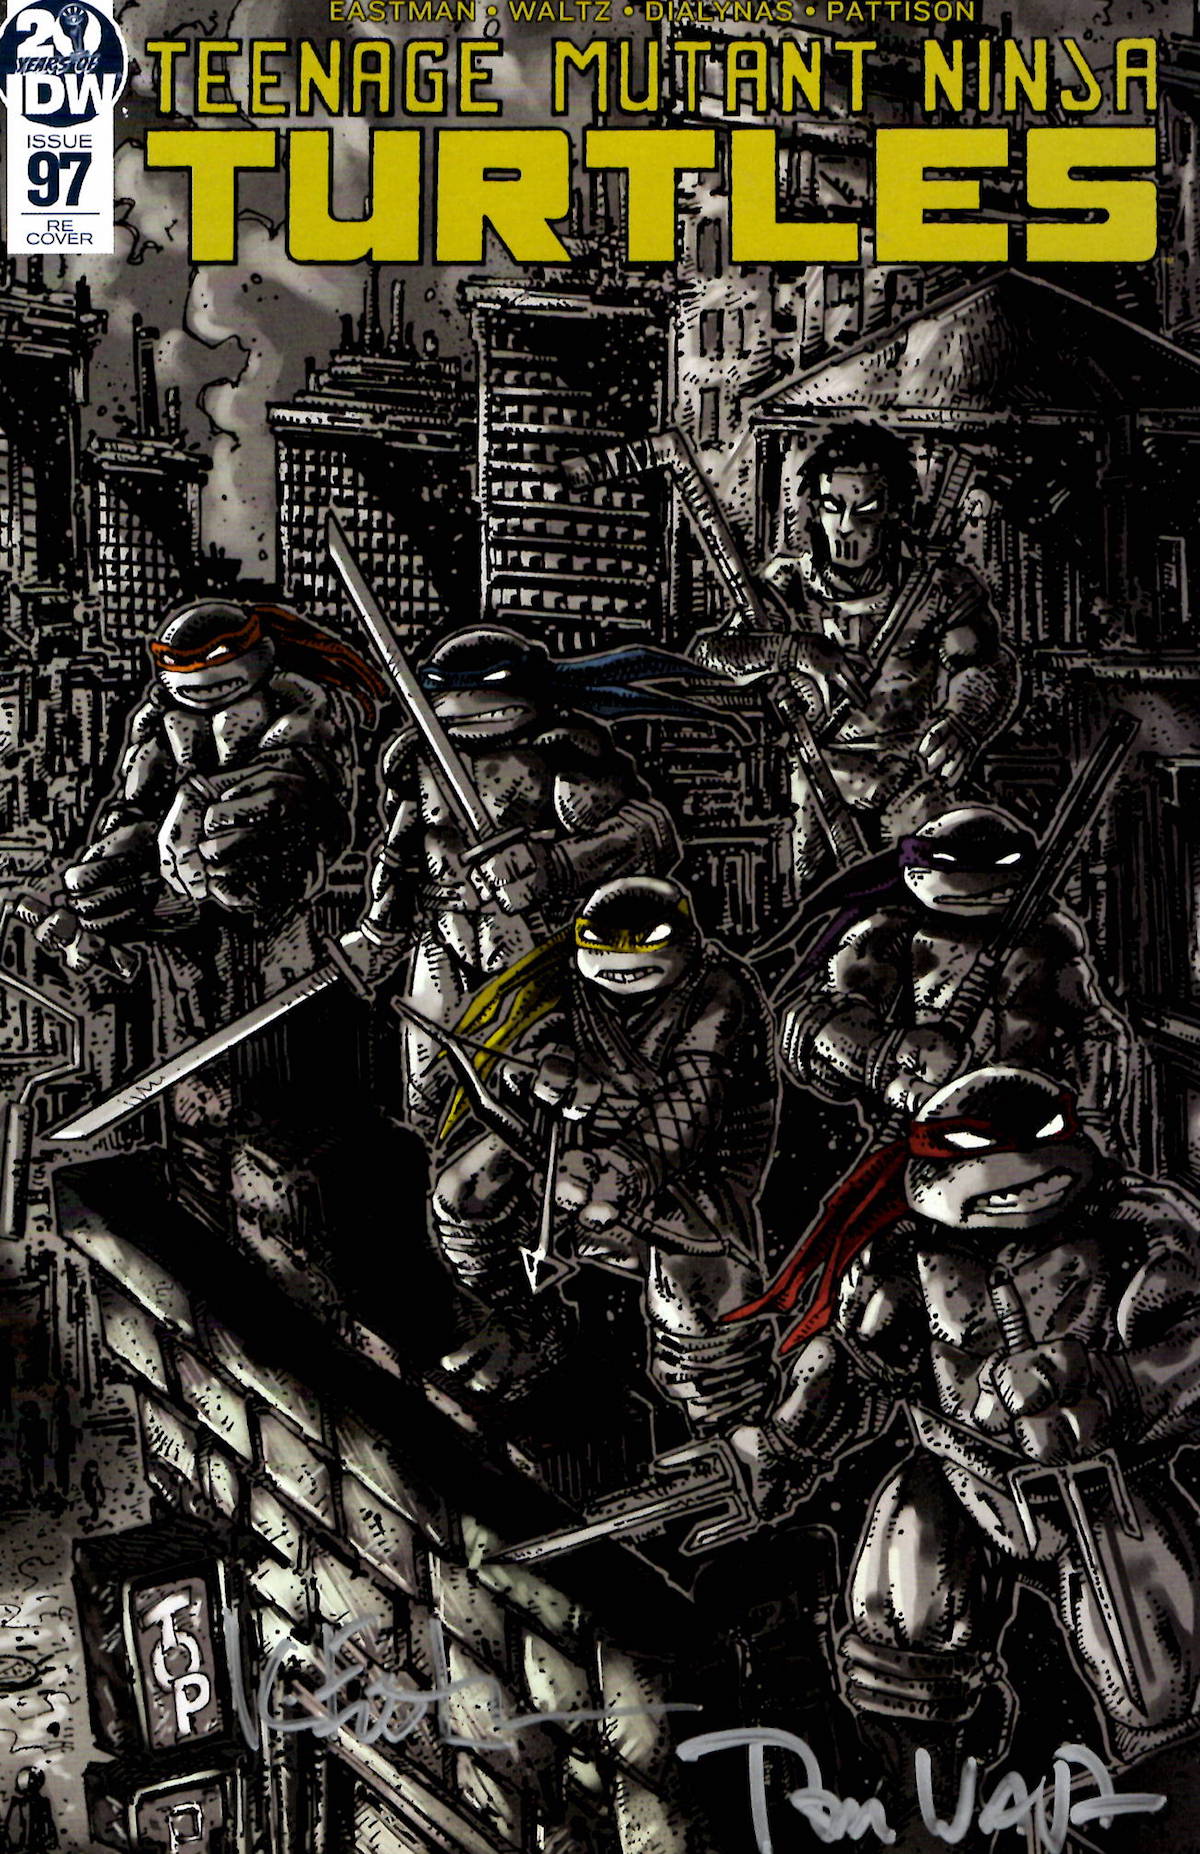 TMNT 97 Fan Club Variant Signed by Eastman and Waltz – Back in Stock!!!